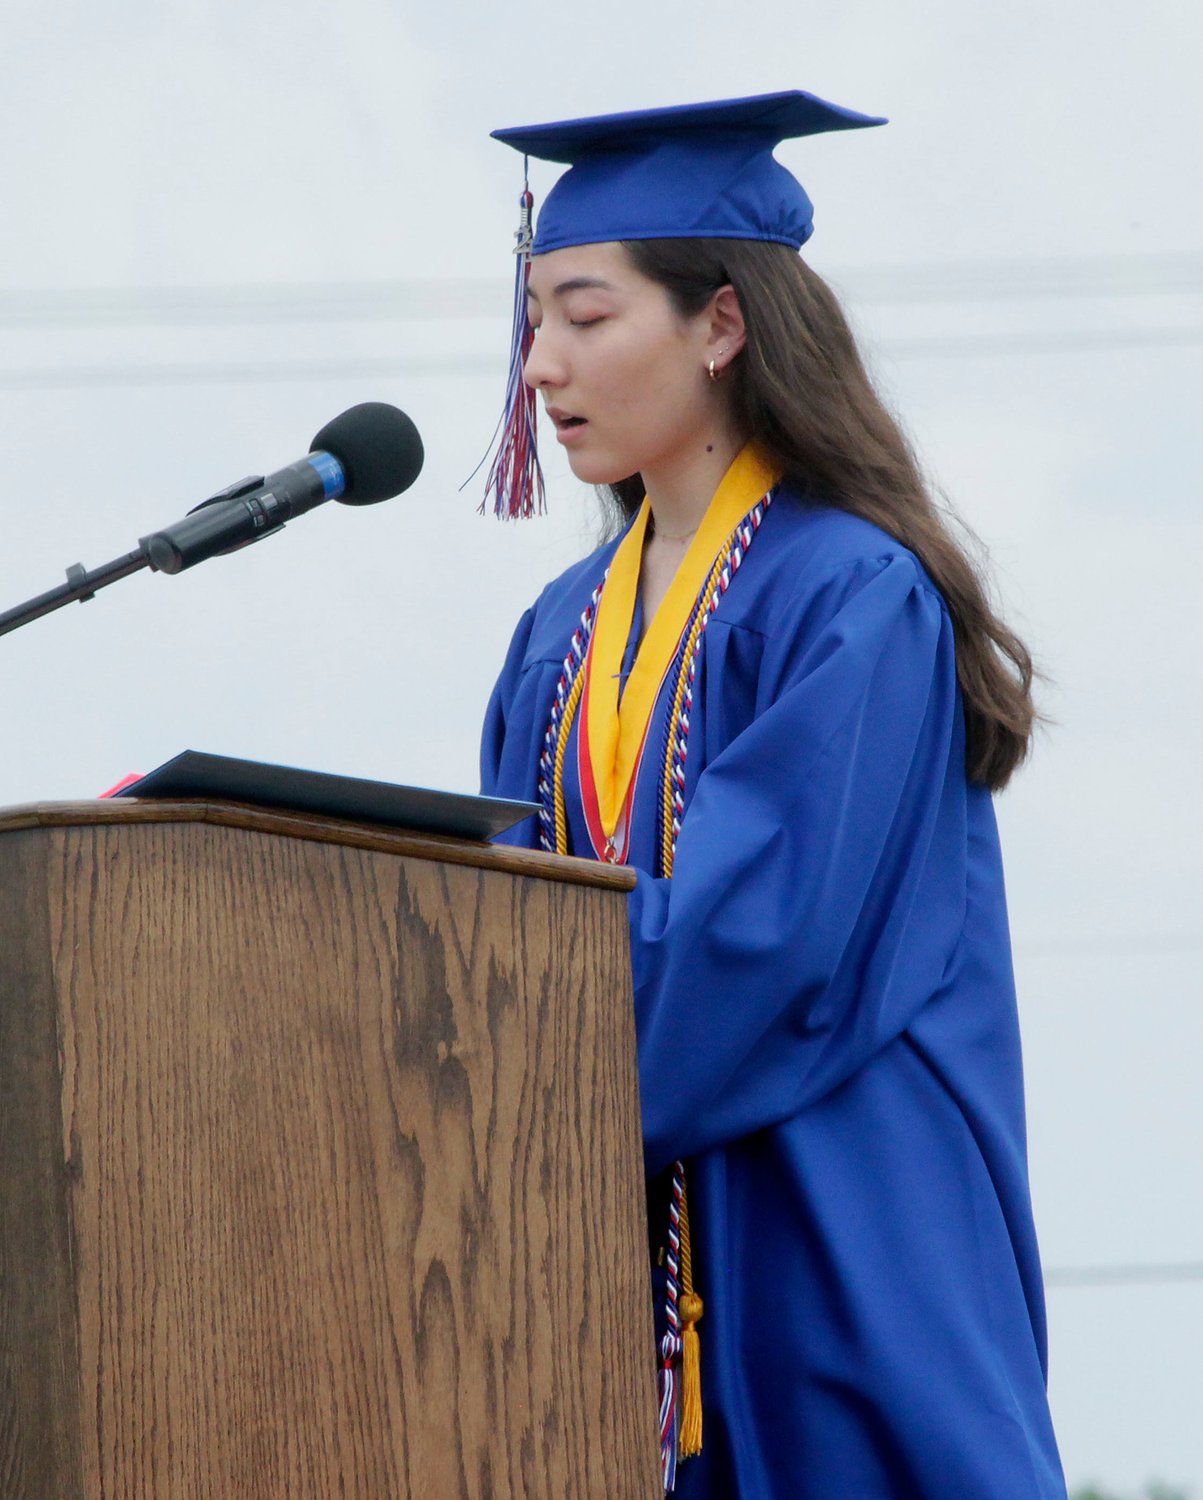 Moberly Class of 2021 Valedictorian Cheyenne Lea gives her speech during the graduation ceremony held May 23.